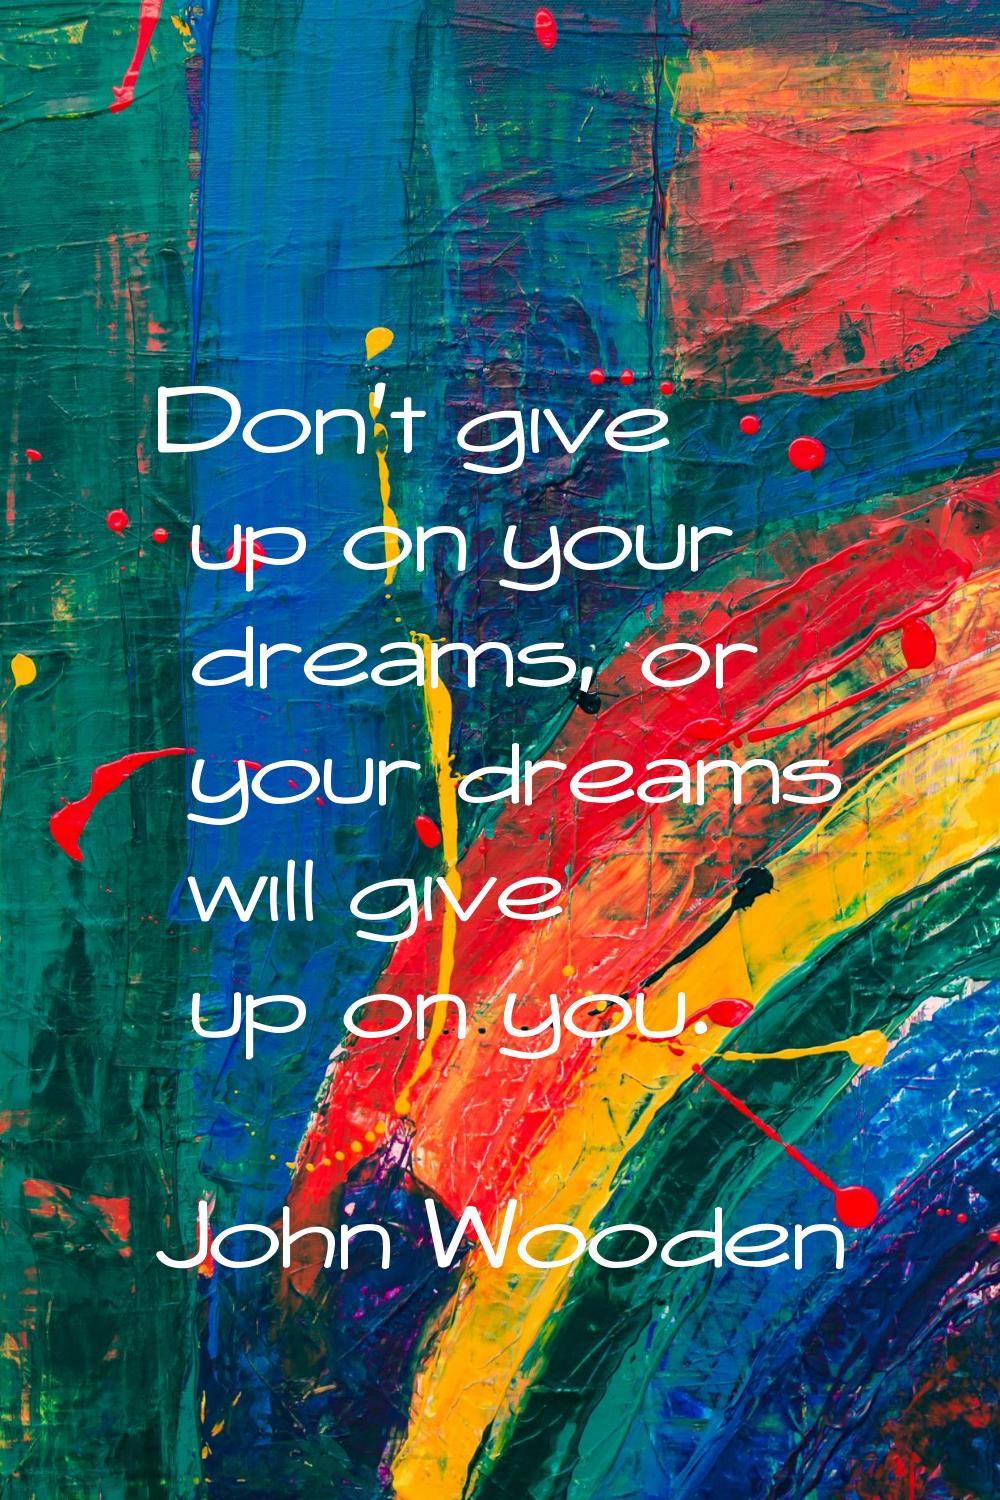 Don't give up on your dreams, or your dreams will give up on you.